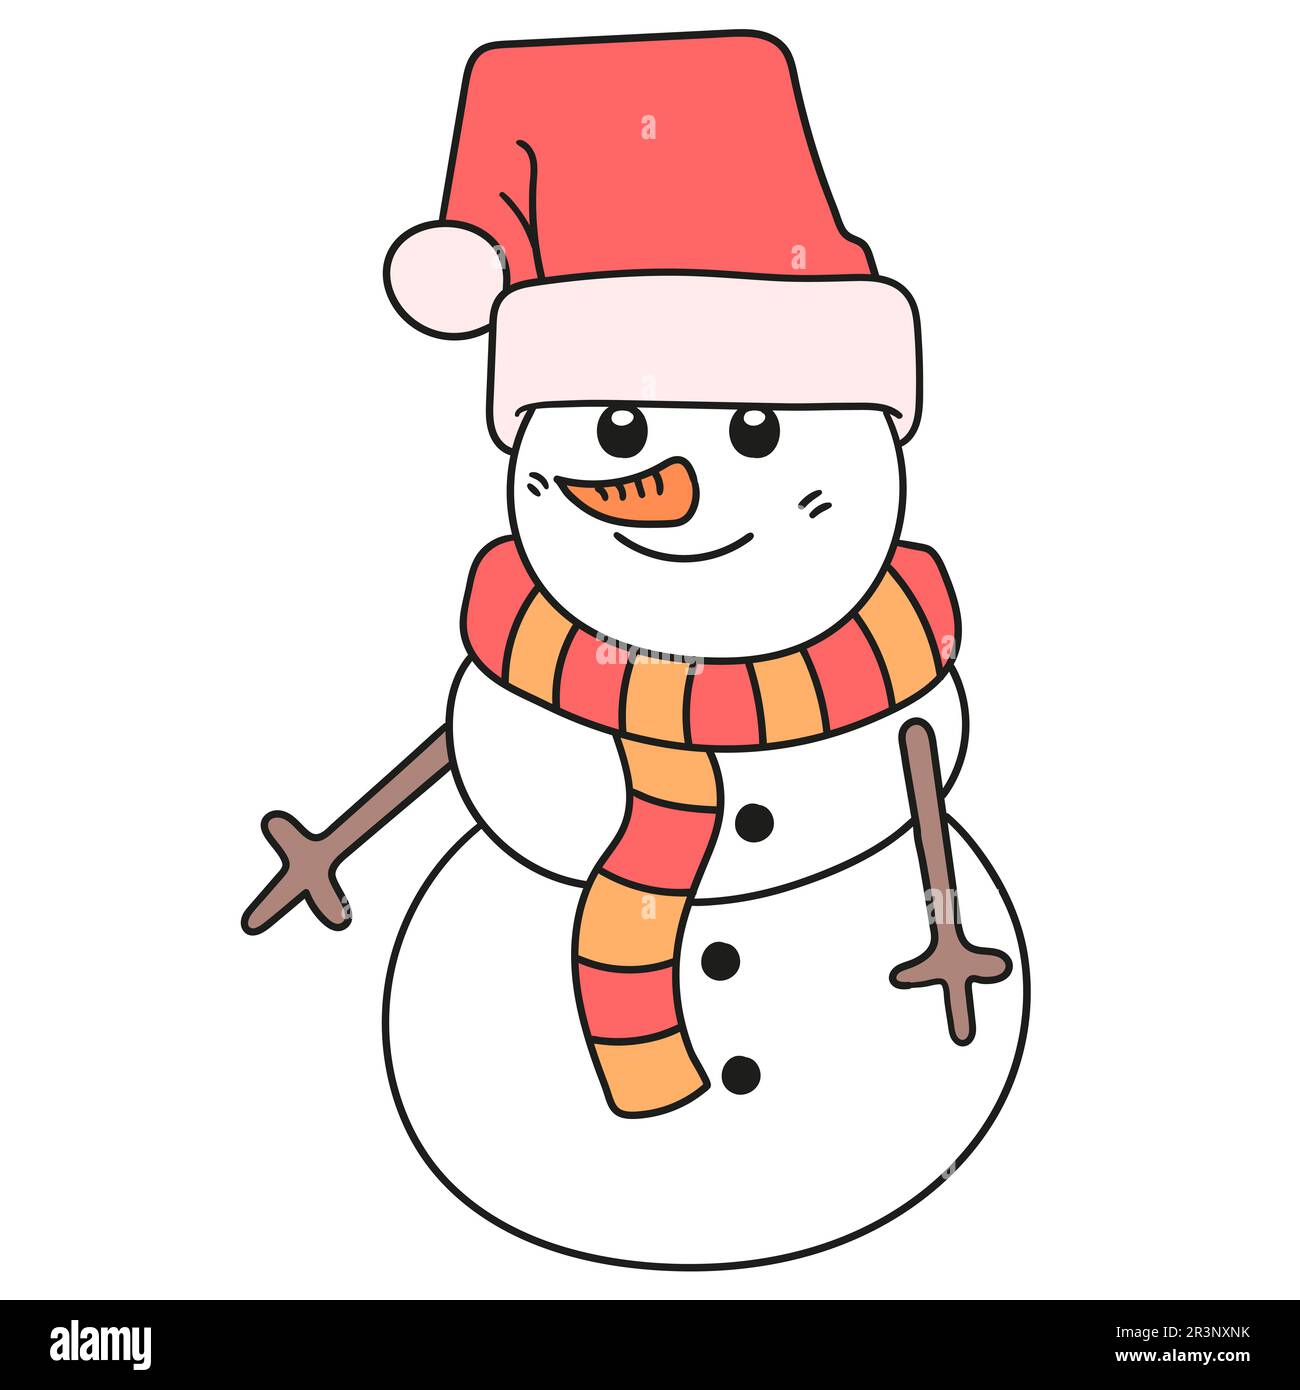 Cute christmas snowman. doodle icon image Stock Photo